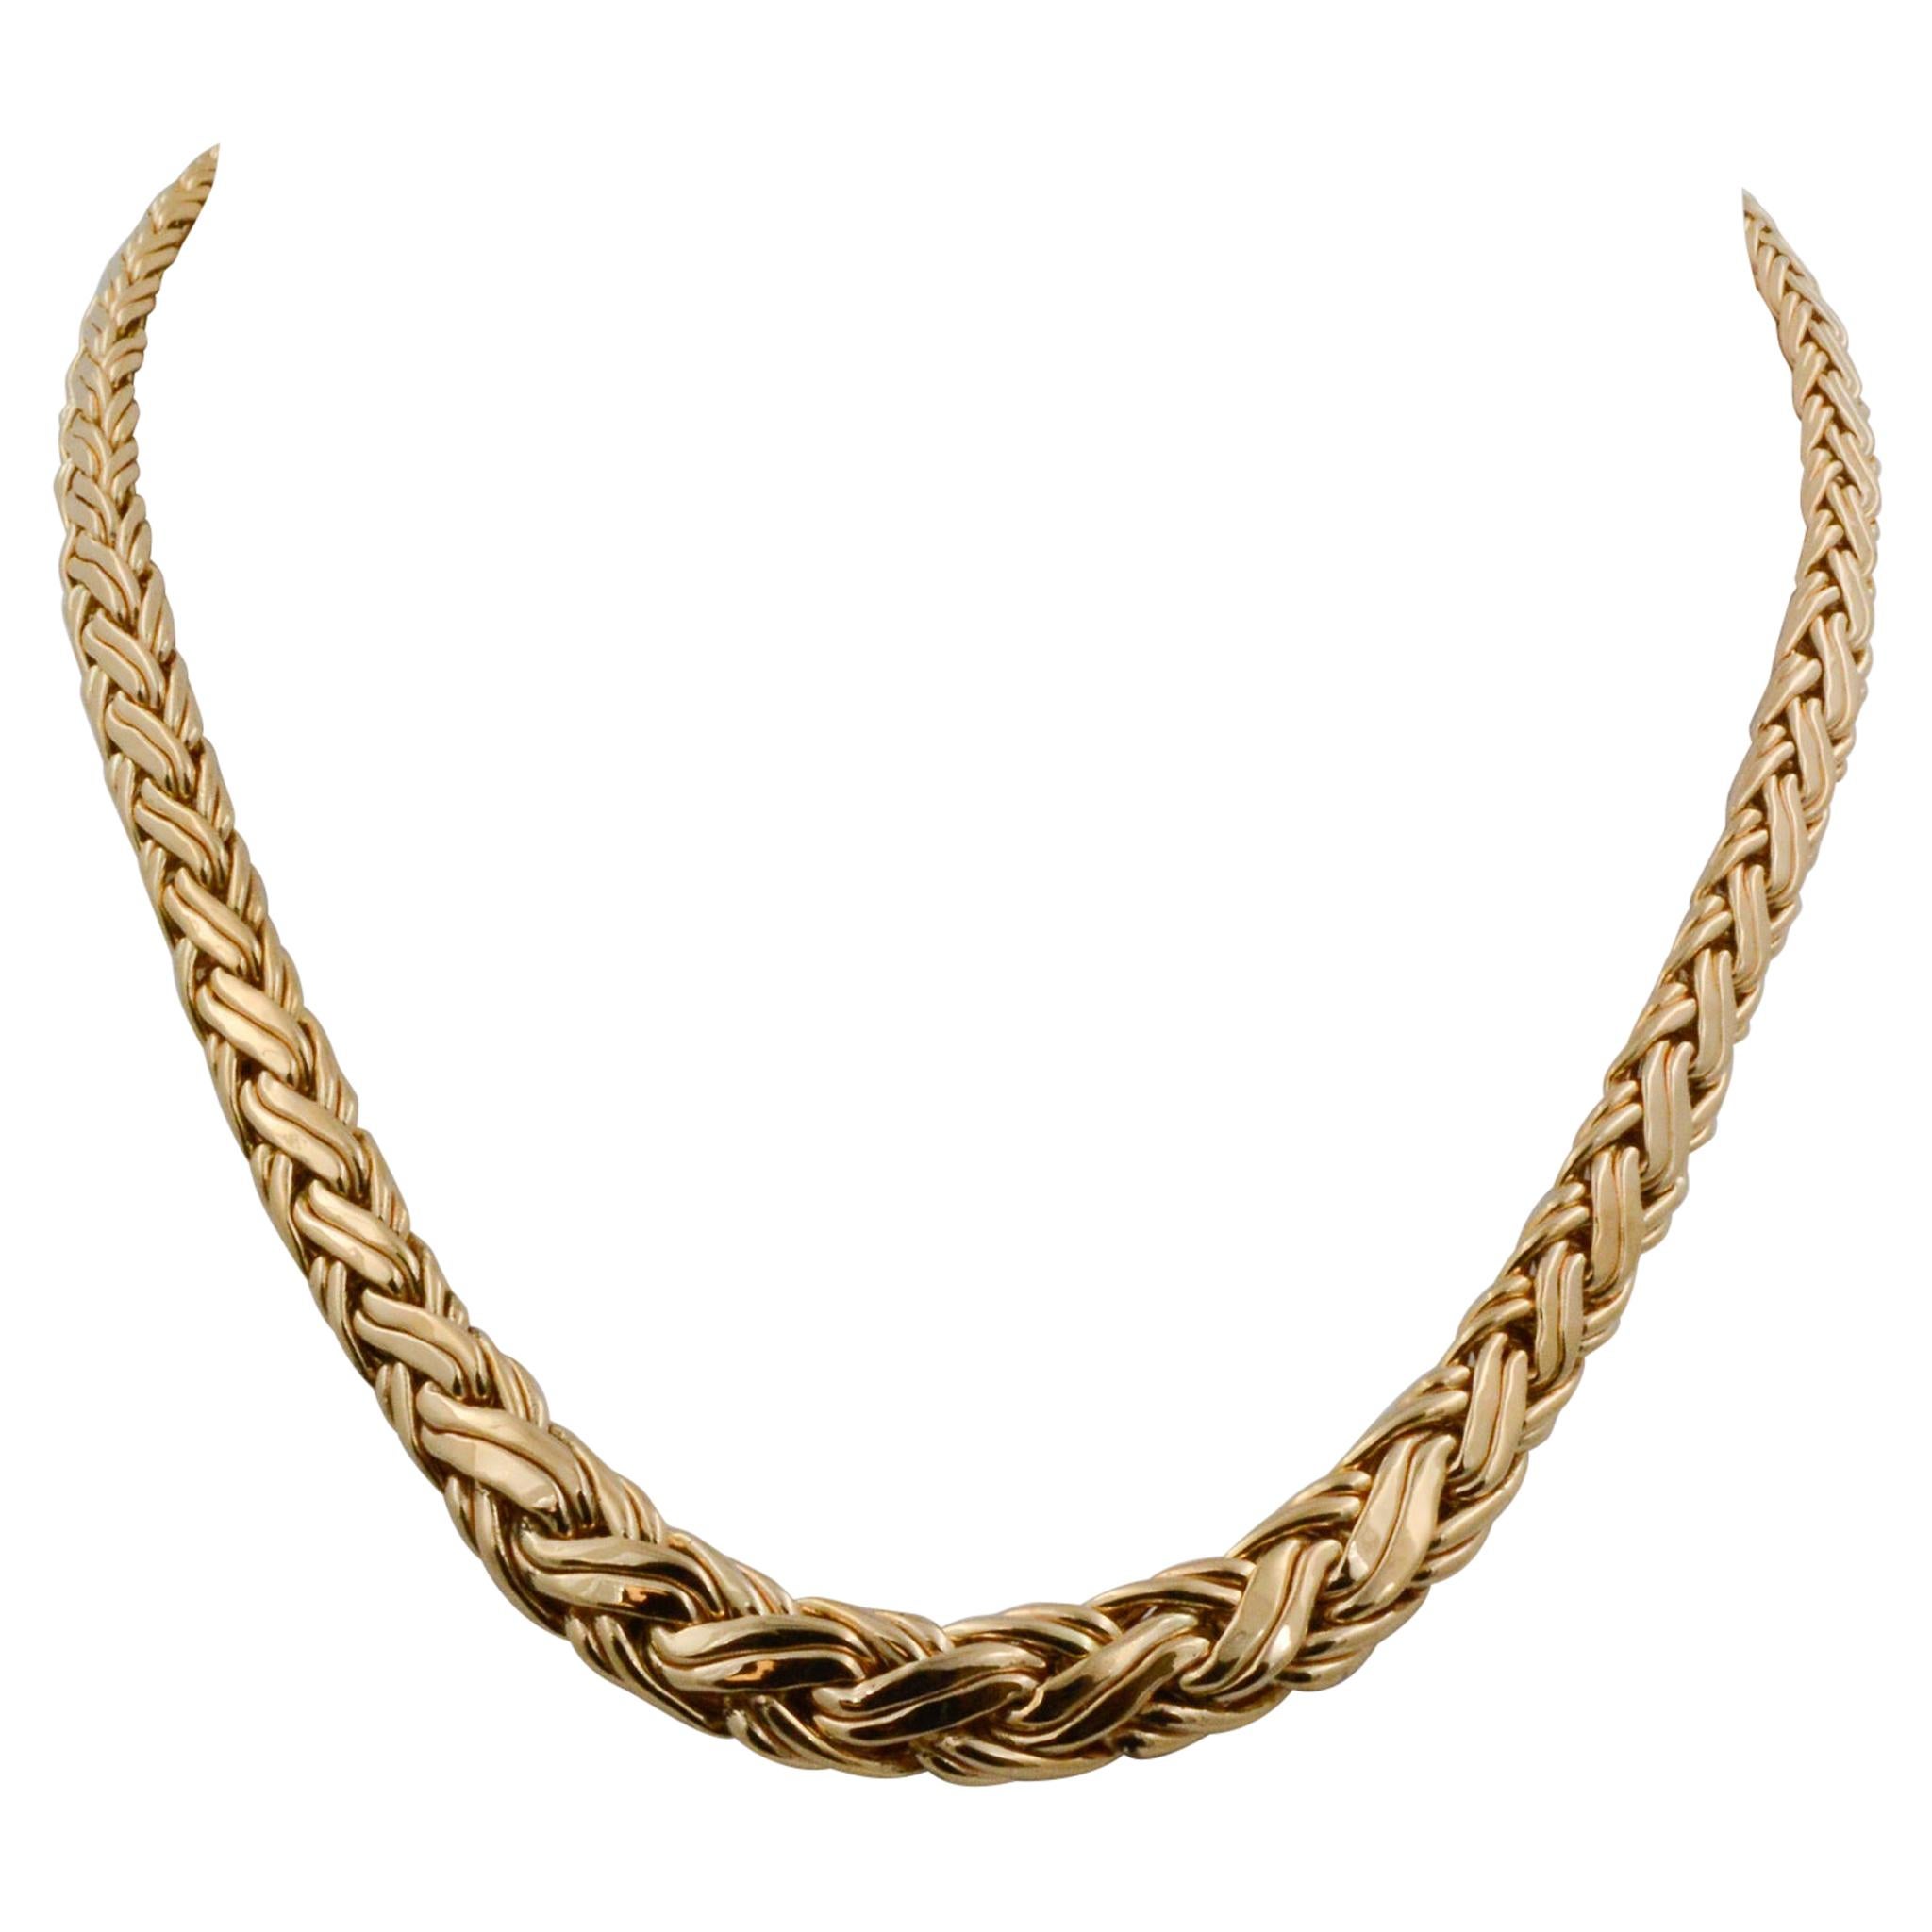 From the 1940s, this Tiffany & Co. necklace is fashioned in 14k yellow gold. The necklace has a Byzantine pattern with a graduated design on a 16